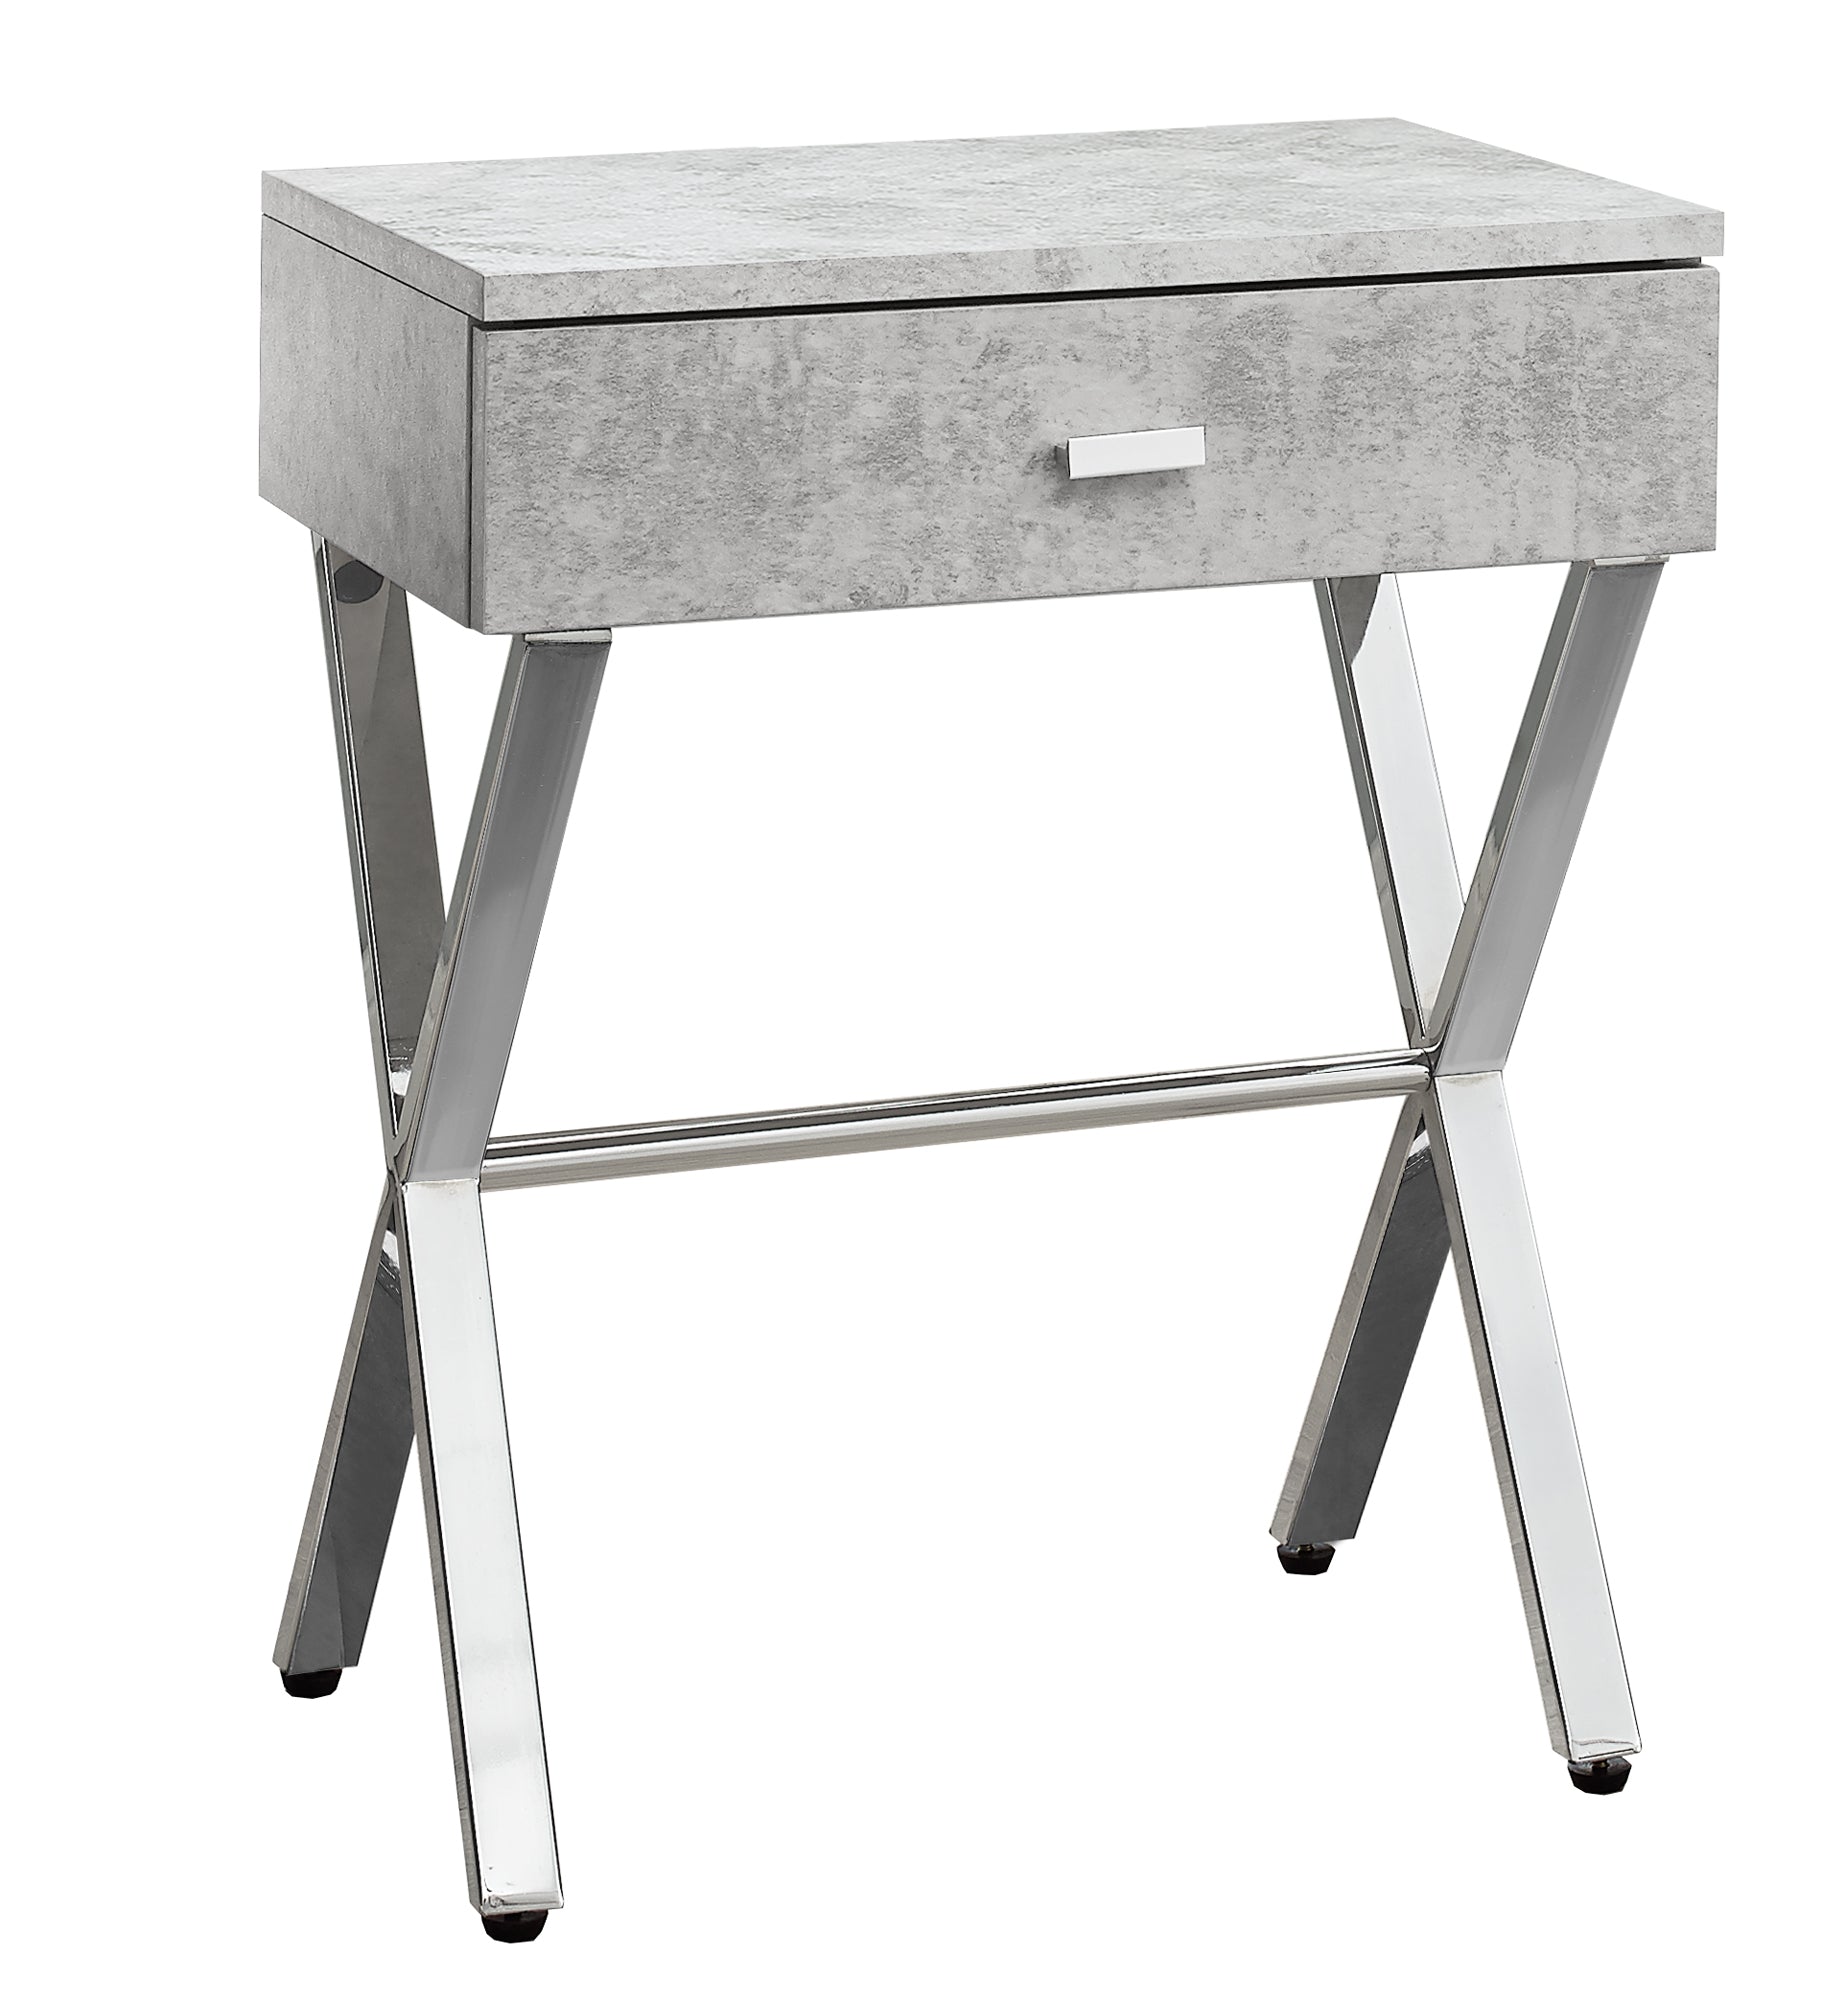 MN-973264    Accent Table, Side, End, Nightstand, Lamp, Living Room, Bedroom, Metal Legs, Laminate, Grey Cement Look, Chrome, Contemporary, Modern